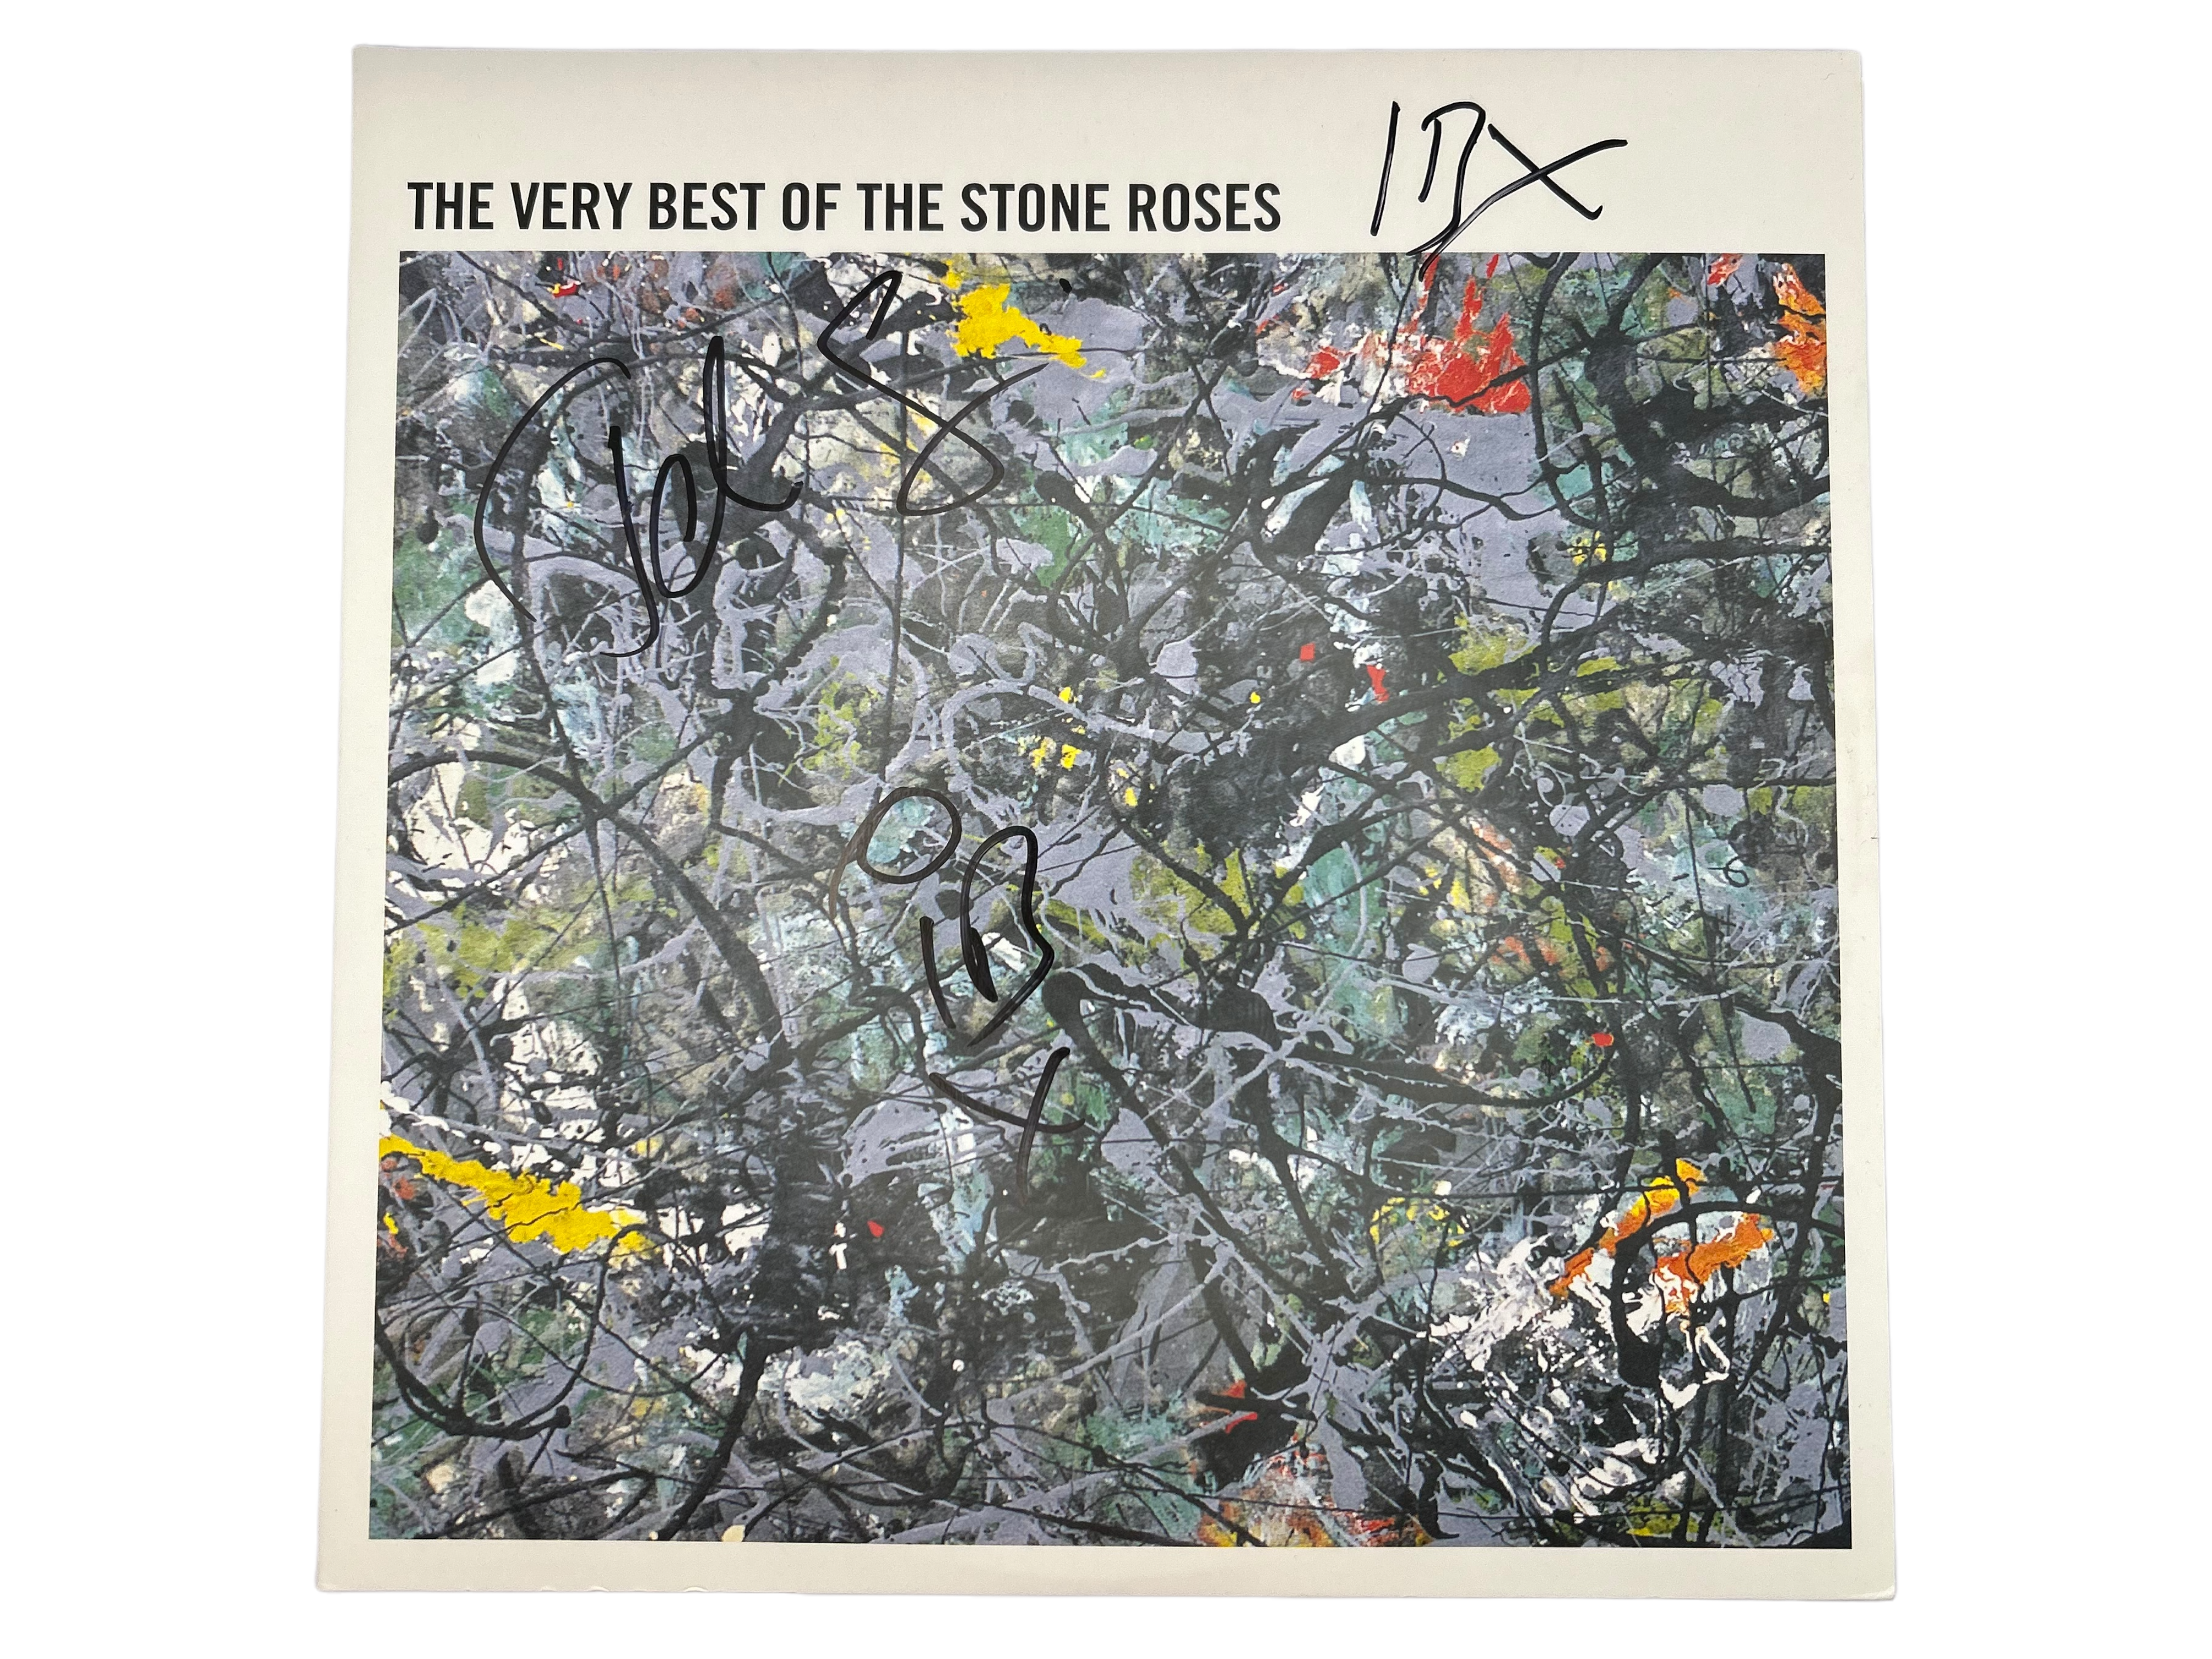 IAN BROWN & JOHN SQUIRE SIGNED THE VERY BEST OF THE STONE ROSES 12” VINYL (AFTAL COA)